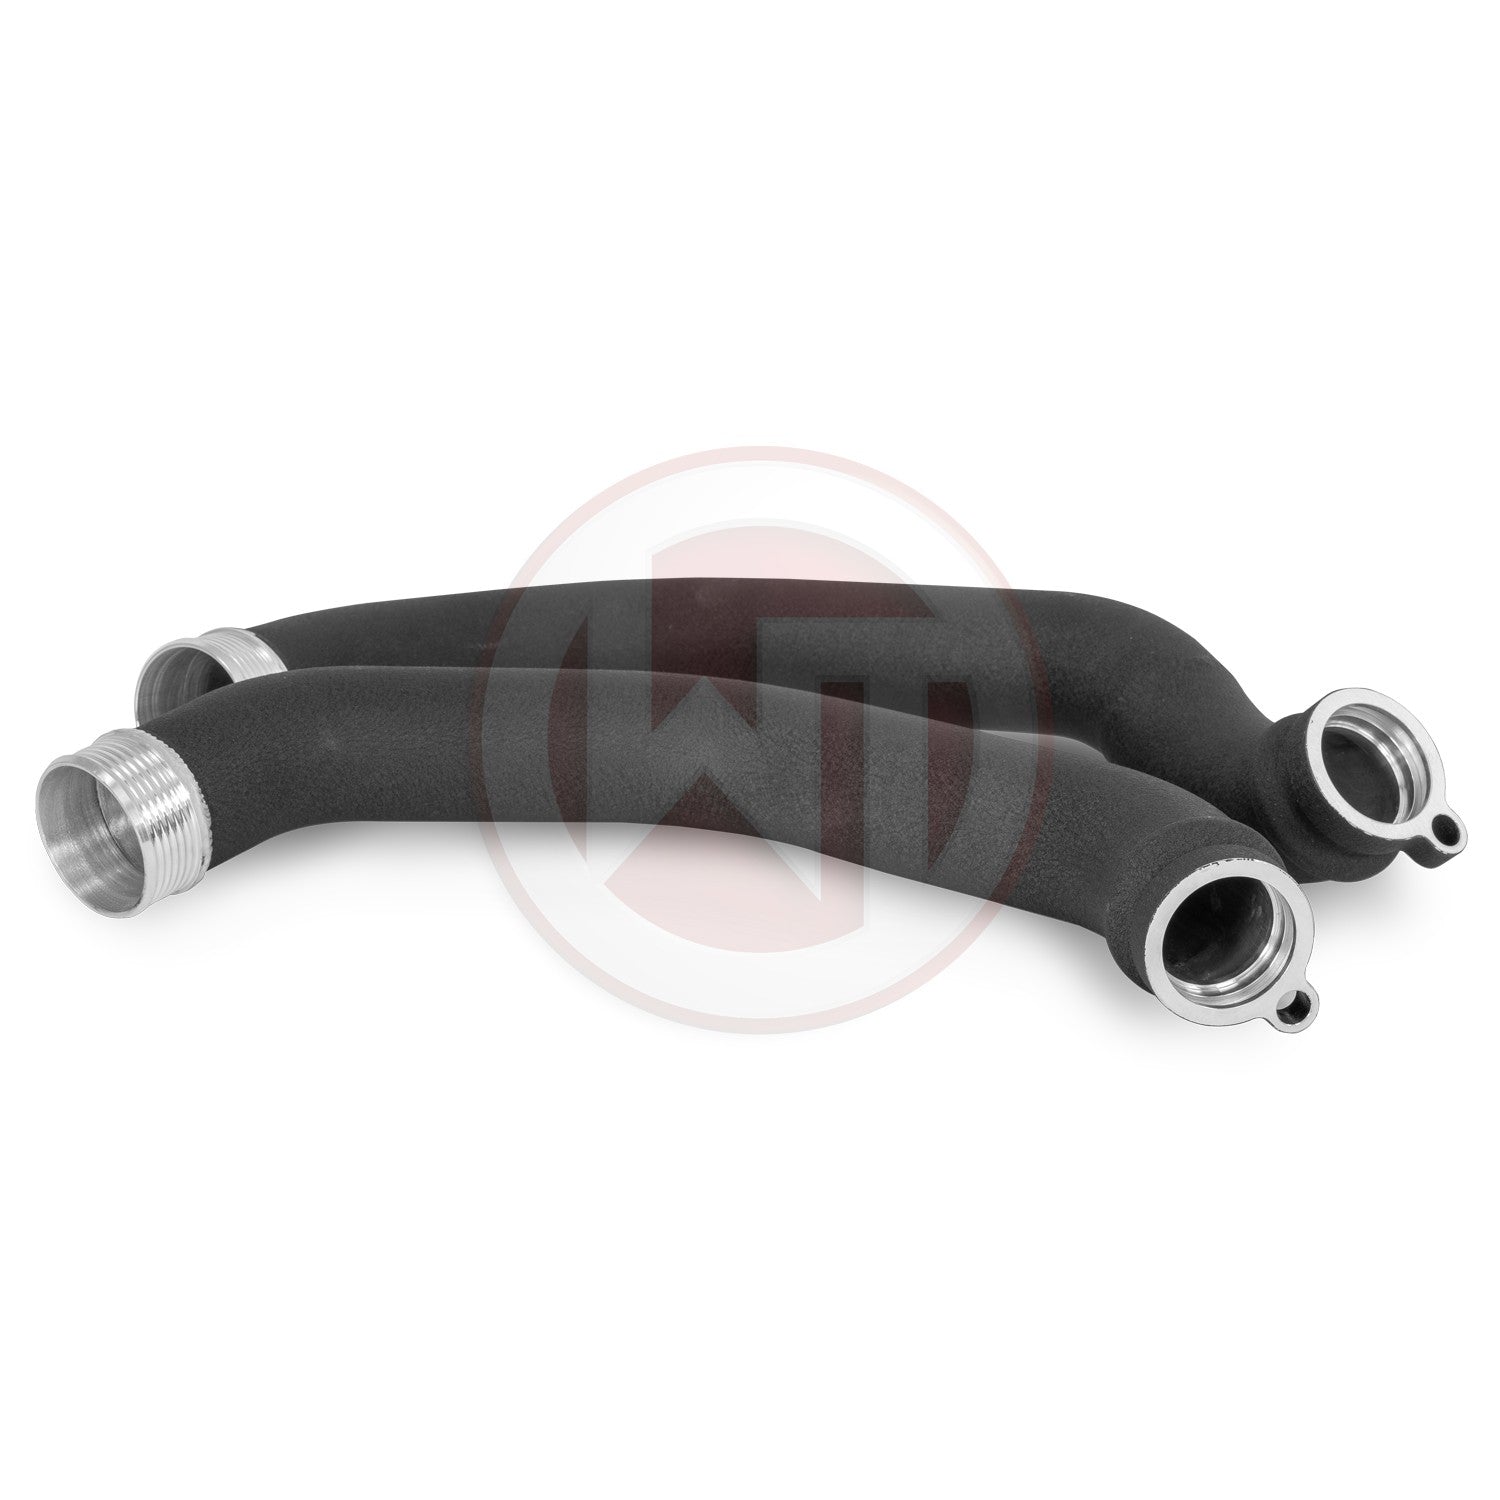 Ø57mm Charge Pipe Kit BMW M2/M3/M4 S55 - Wayside Performance 